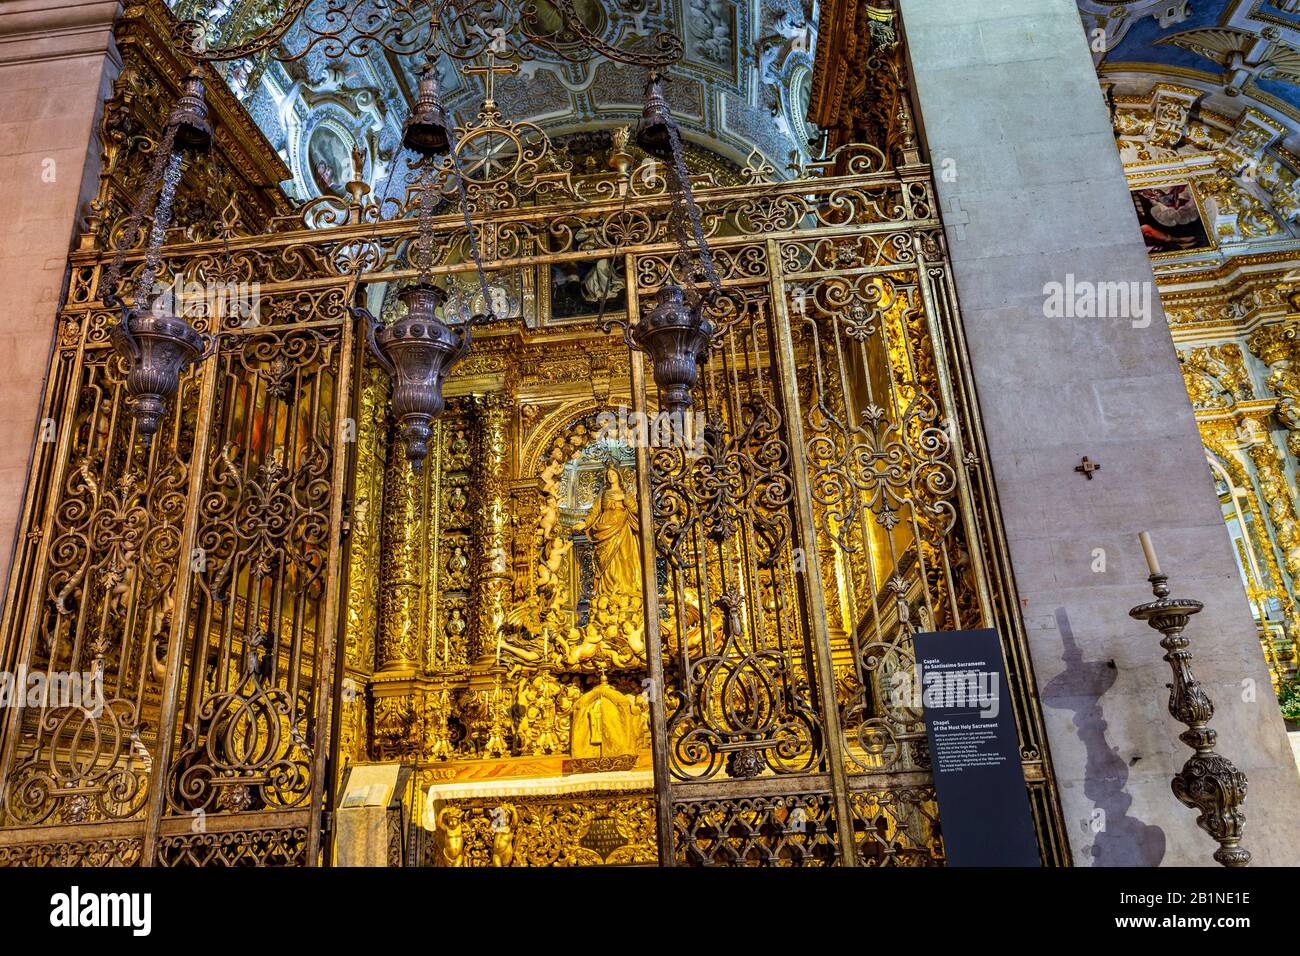 View of the Chapel of the Most Holy Sacrament, built in 1636 inside the Jesuit Church of Saint Roch, in Bairro Alto, Lisbon, Portugal Stock Photo